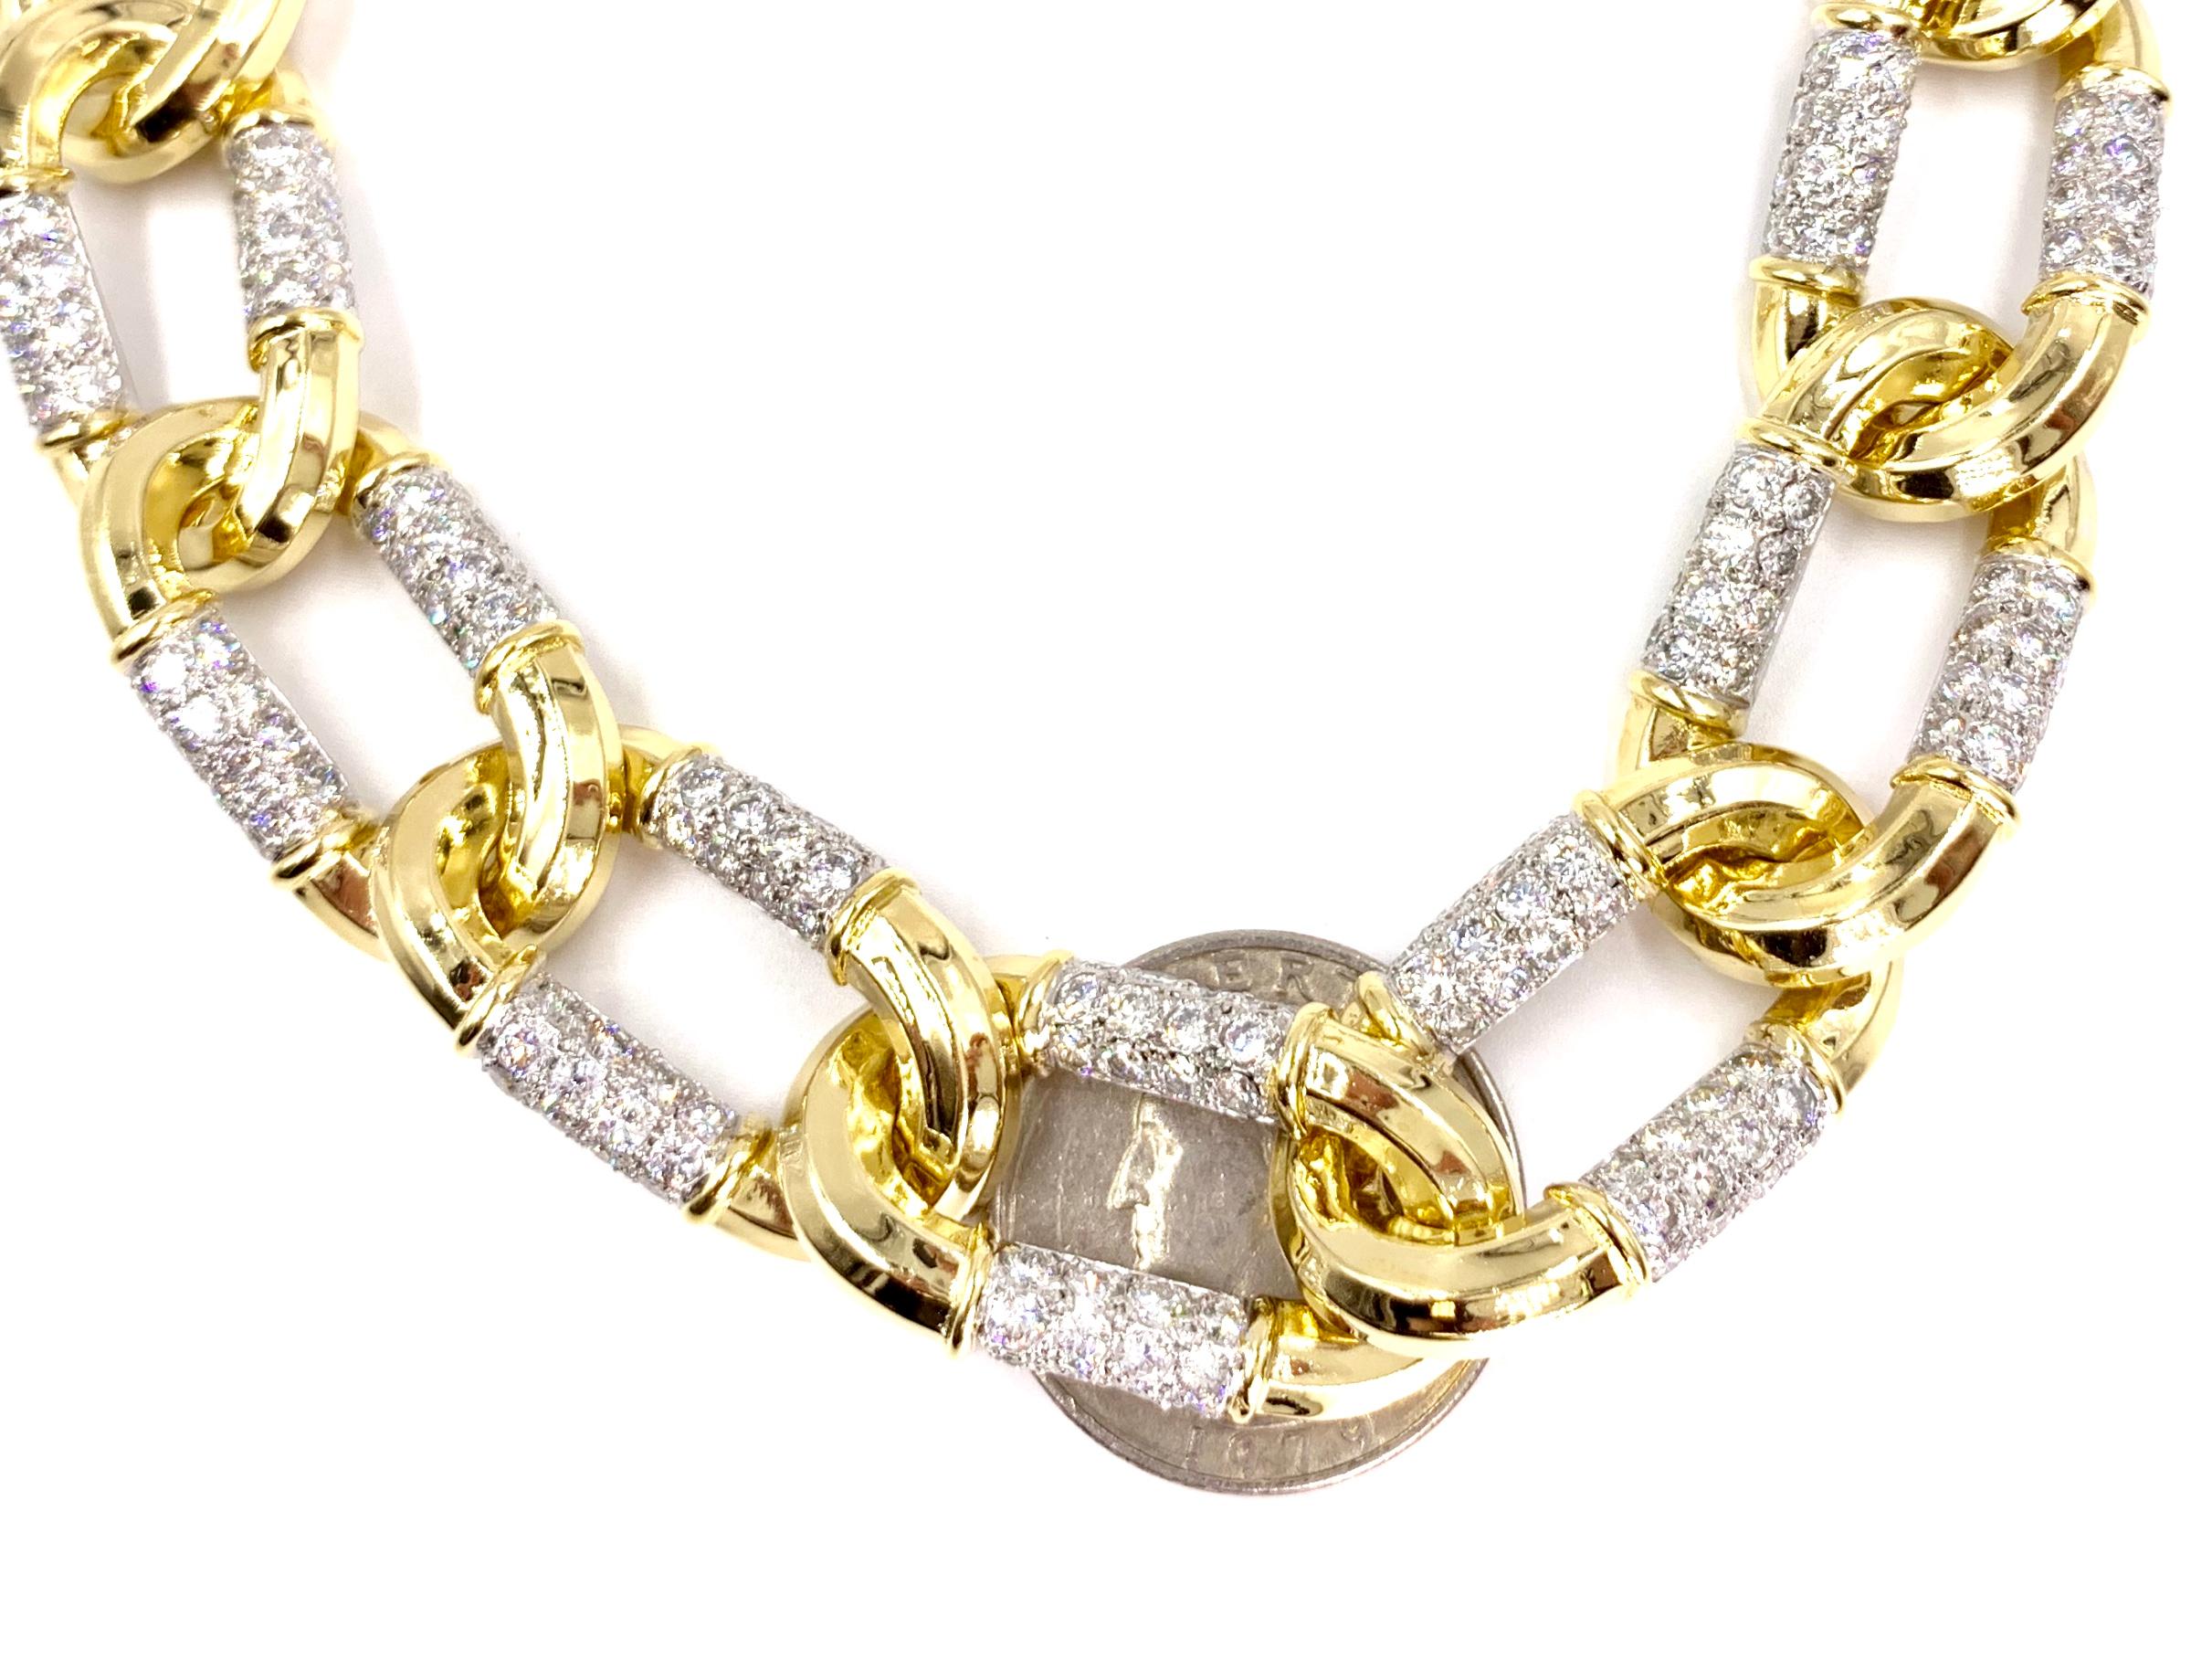 18 Karat and Platinum Charles Turi Large Oval Link Necklace with Diamonds In Excellent Condition For Sale In Pikesville, MD